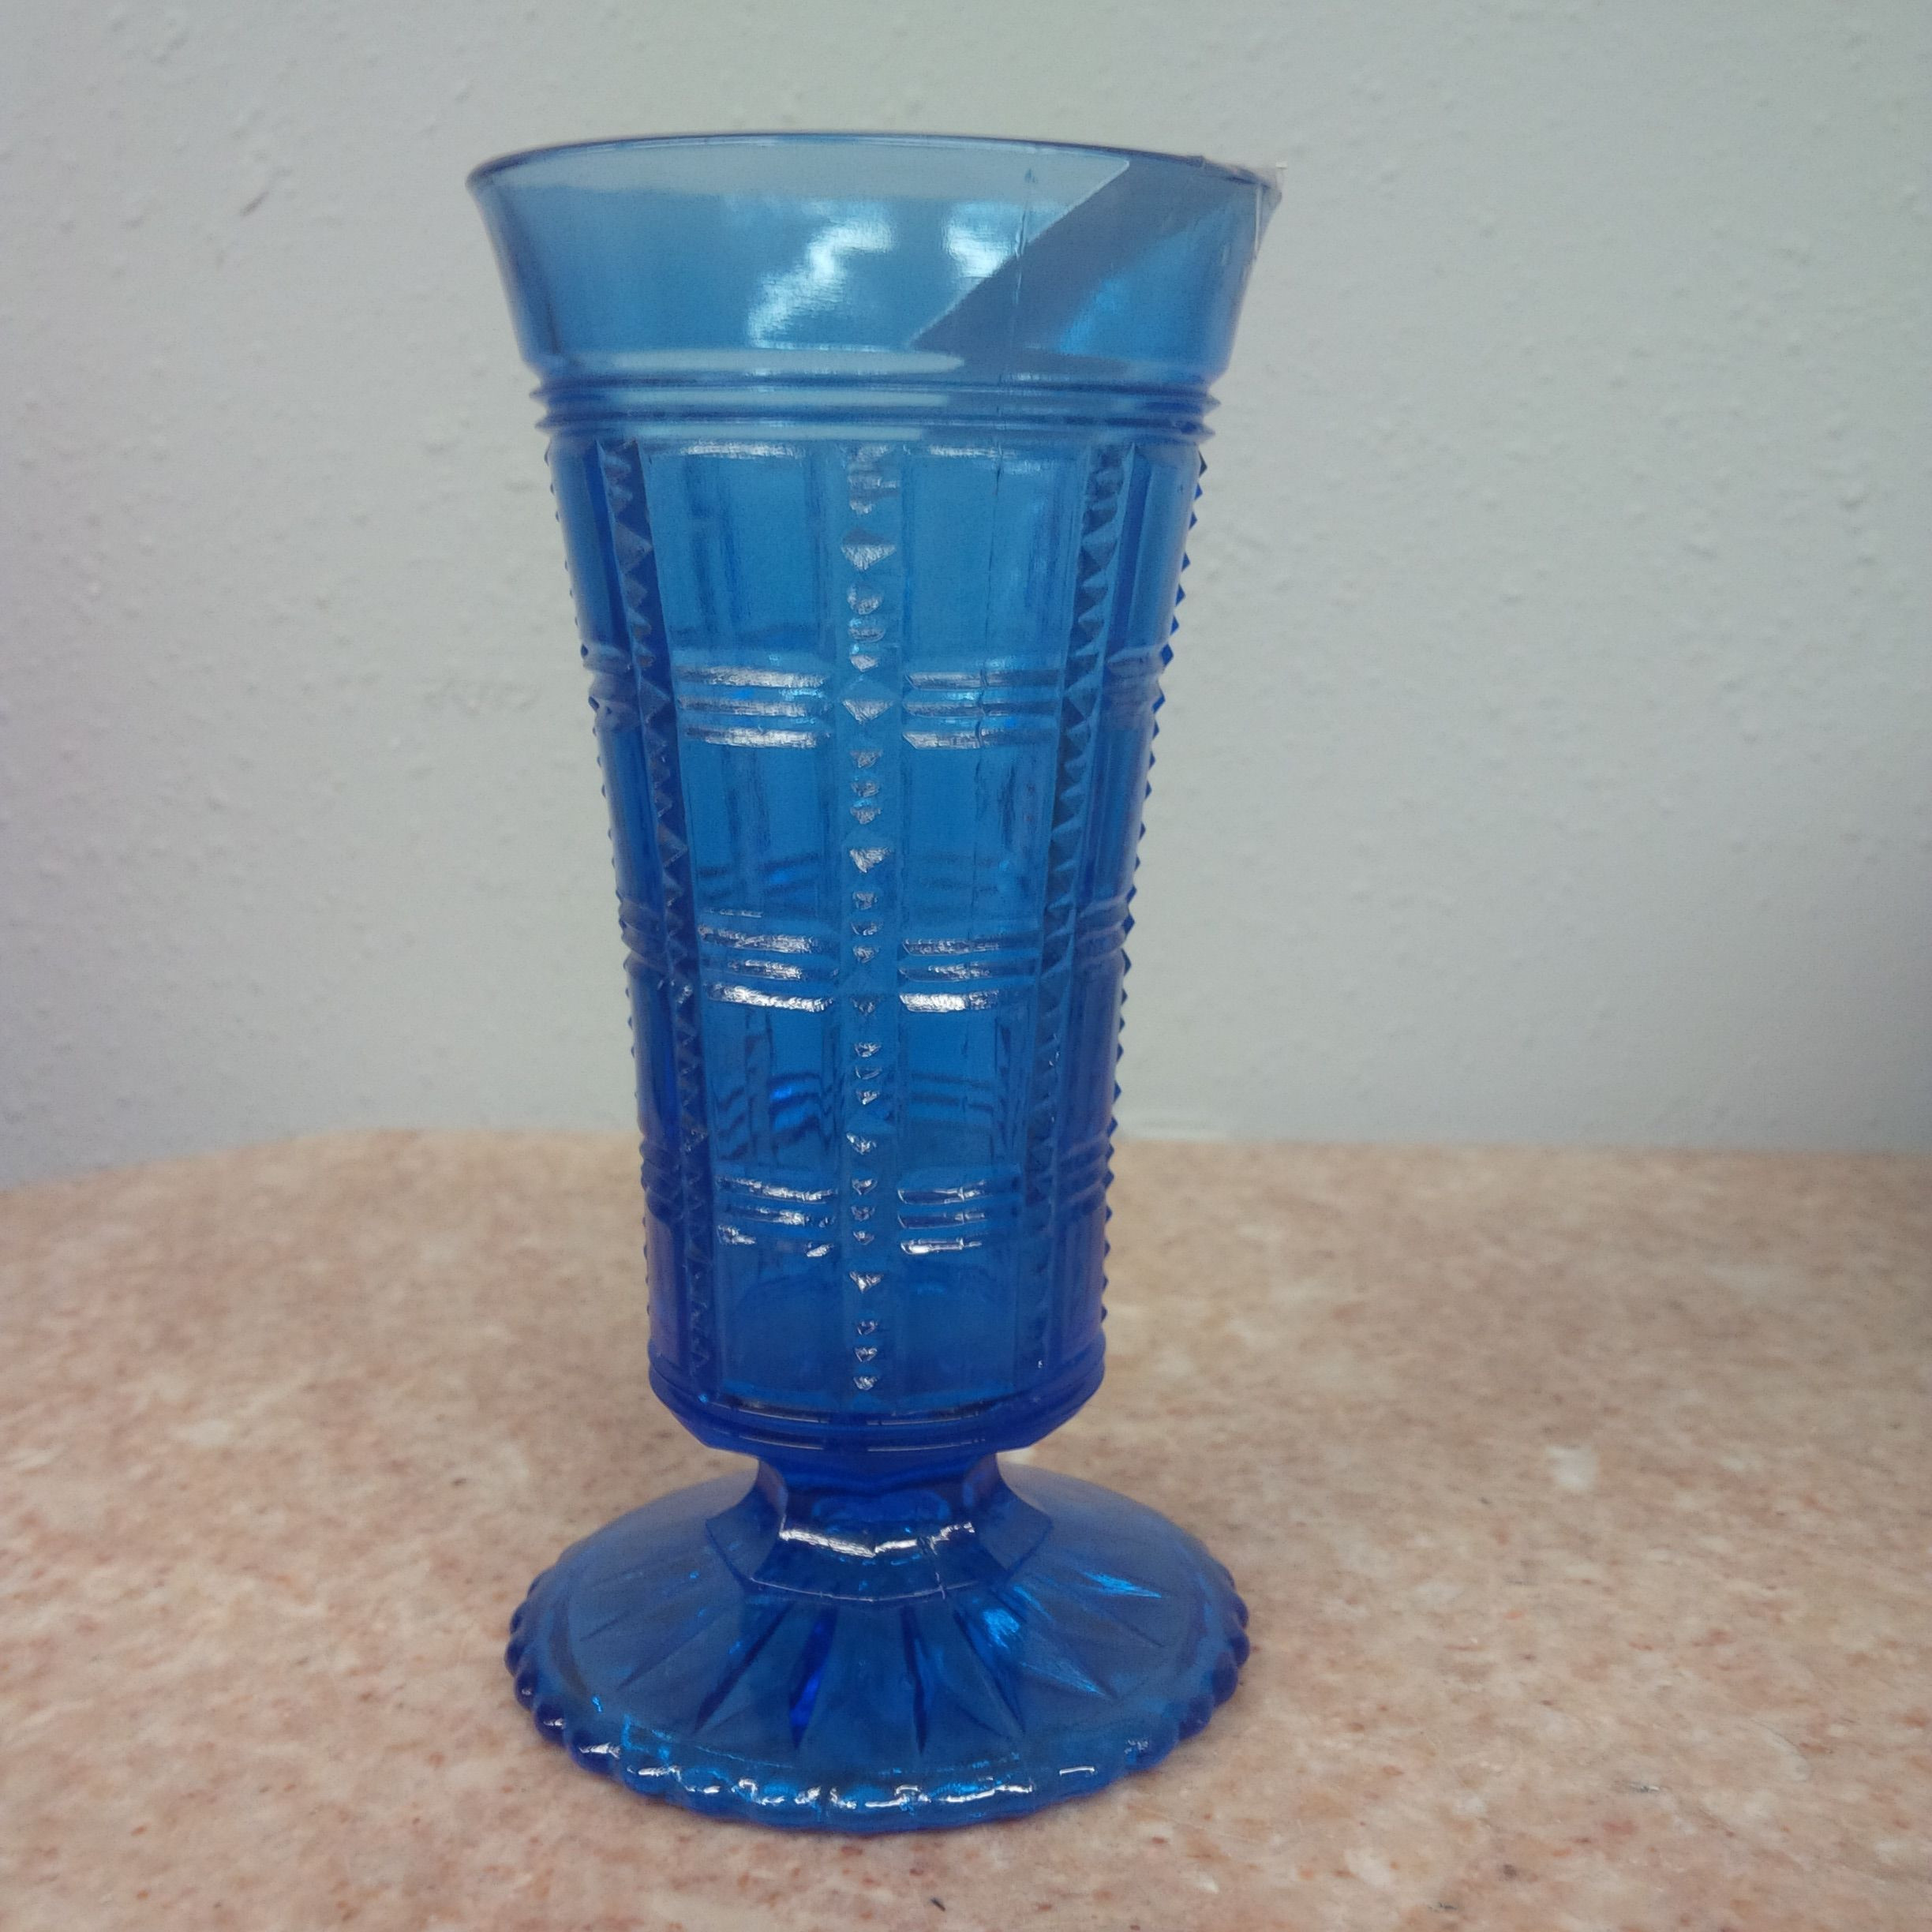 17 attractive Lead Crystal Bud Vase 2024 free download lead crystal bud vase of 23 blue crystal vase the weekly world with regard to cobalt blue beaded block glass vase parfait by imperial glass co